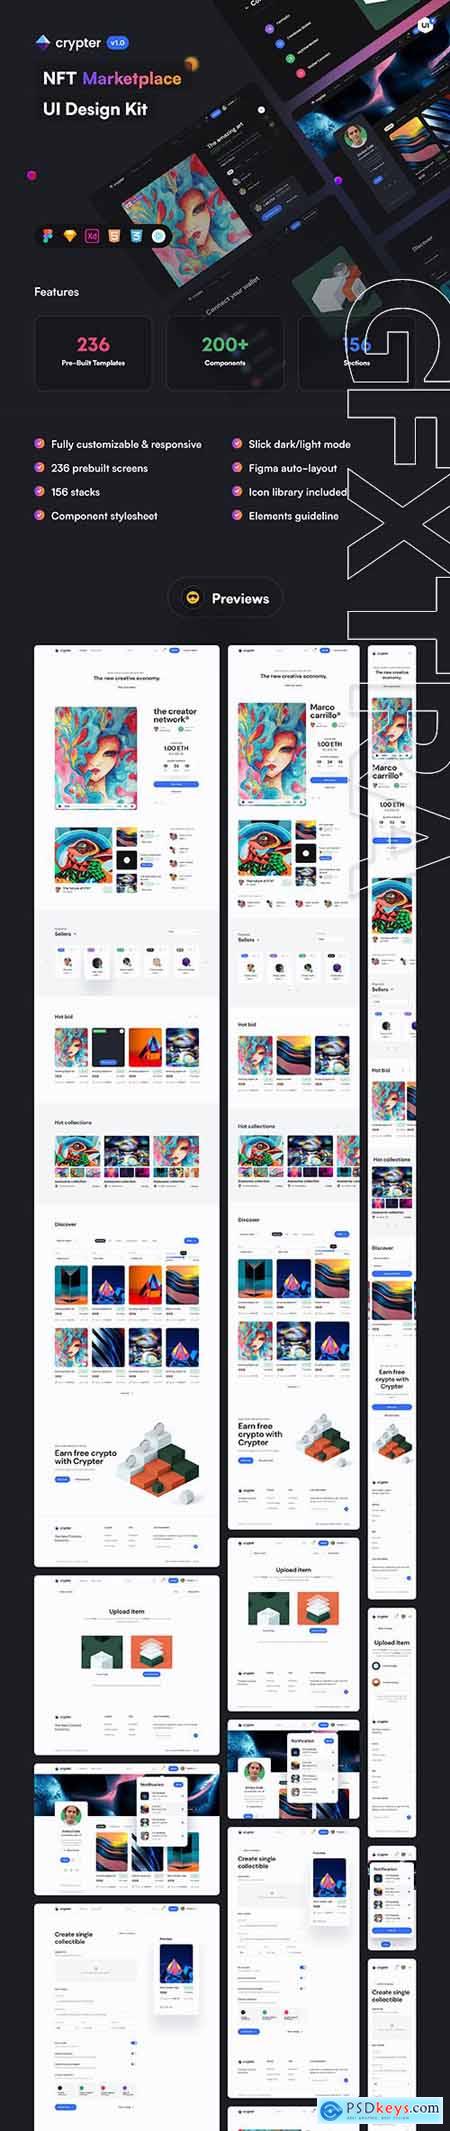 Crypter - NFT Marketplace UI Kit » Free Download Photoshop Vector Stock